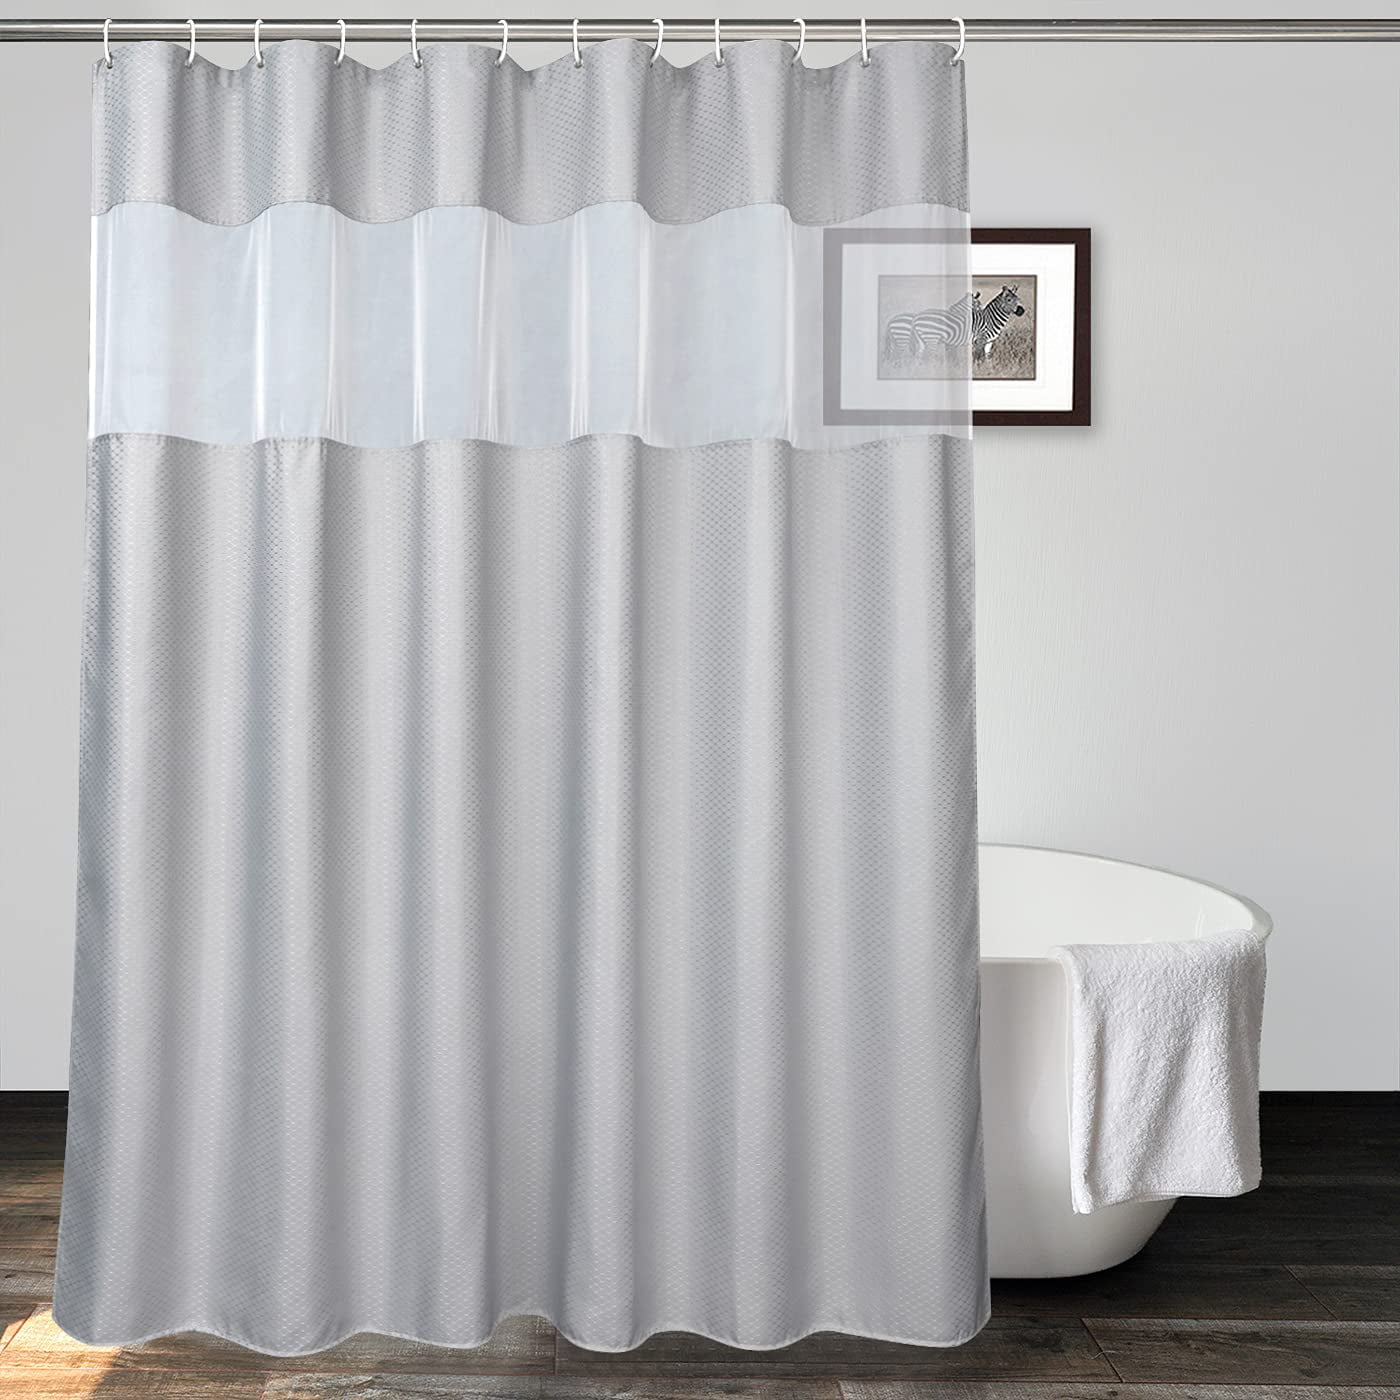 Waffle Weave Fabric Bathroom Curtain, Are Shower Curtains Out Of Style